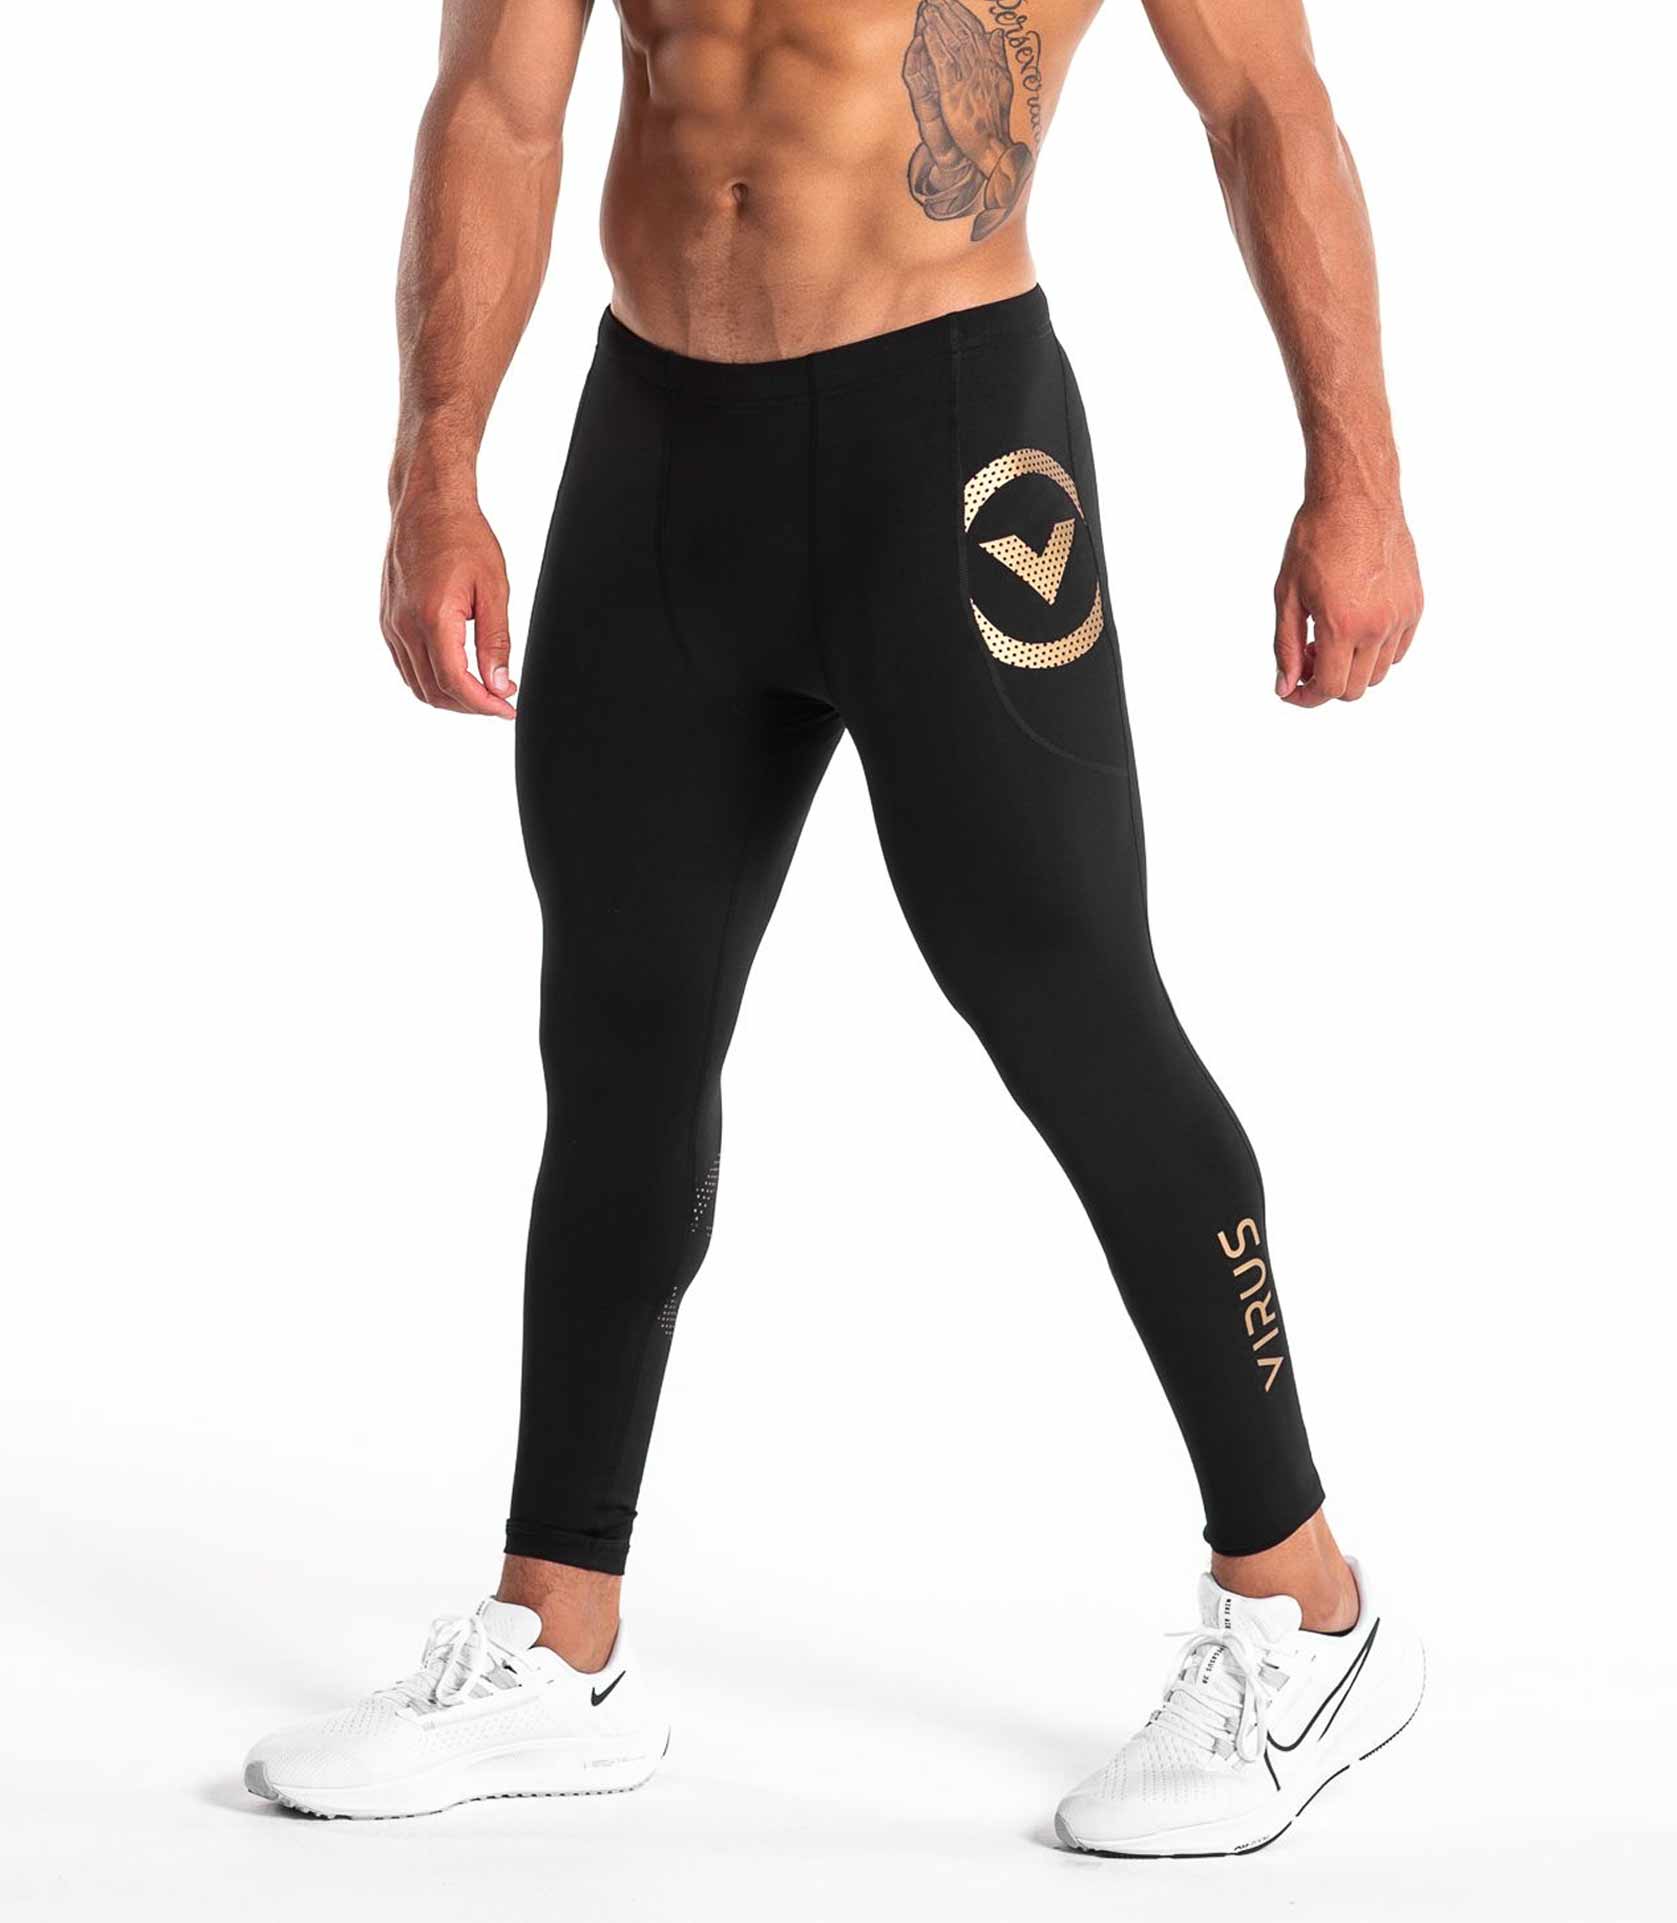 Recover stronger and faster with our Bioceramic Au9 Compression Tech Pant.  Head on over to the technology page at virusintl.com to learn more about  our …